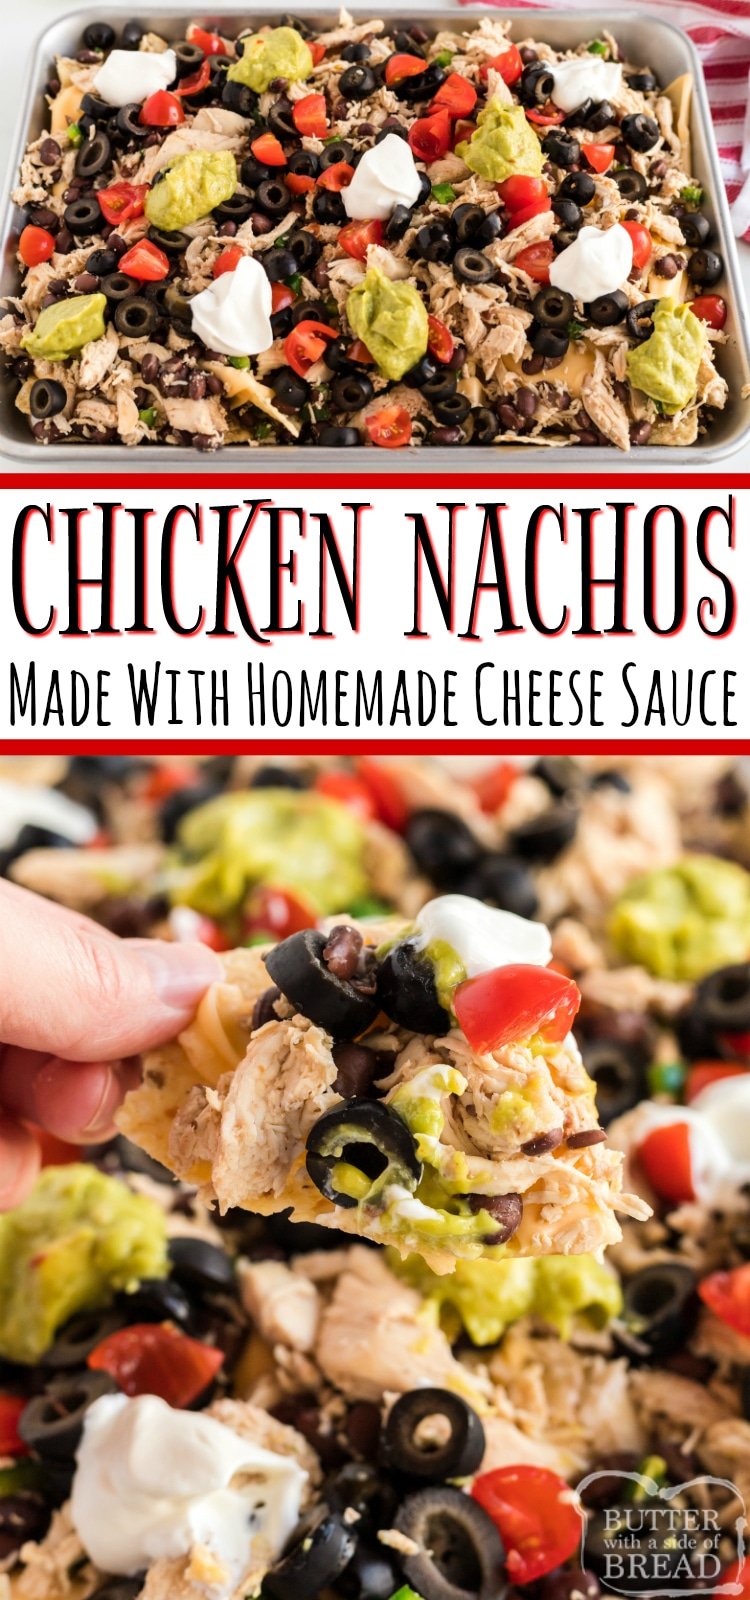 Chicken Nachos recipe made with a simple homemade cheese sauce made from real cheese. This simple nacho recipe can be made without an oven and you can add any veggies or toppings you prefer!